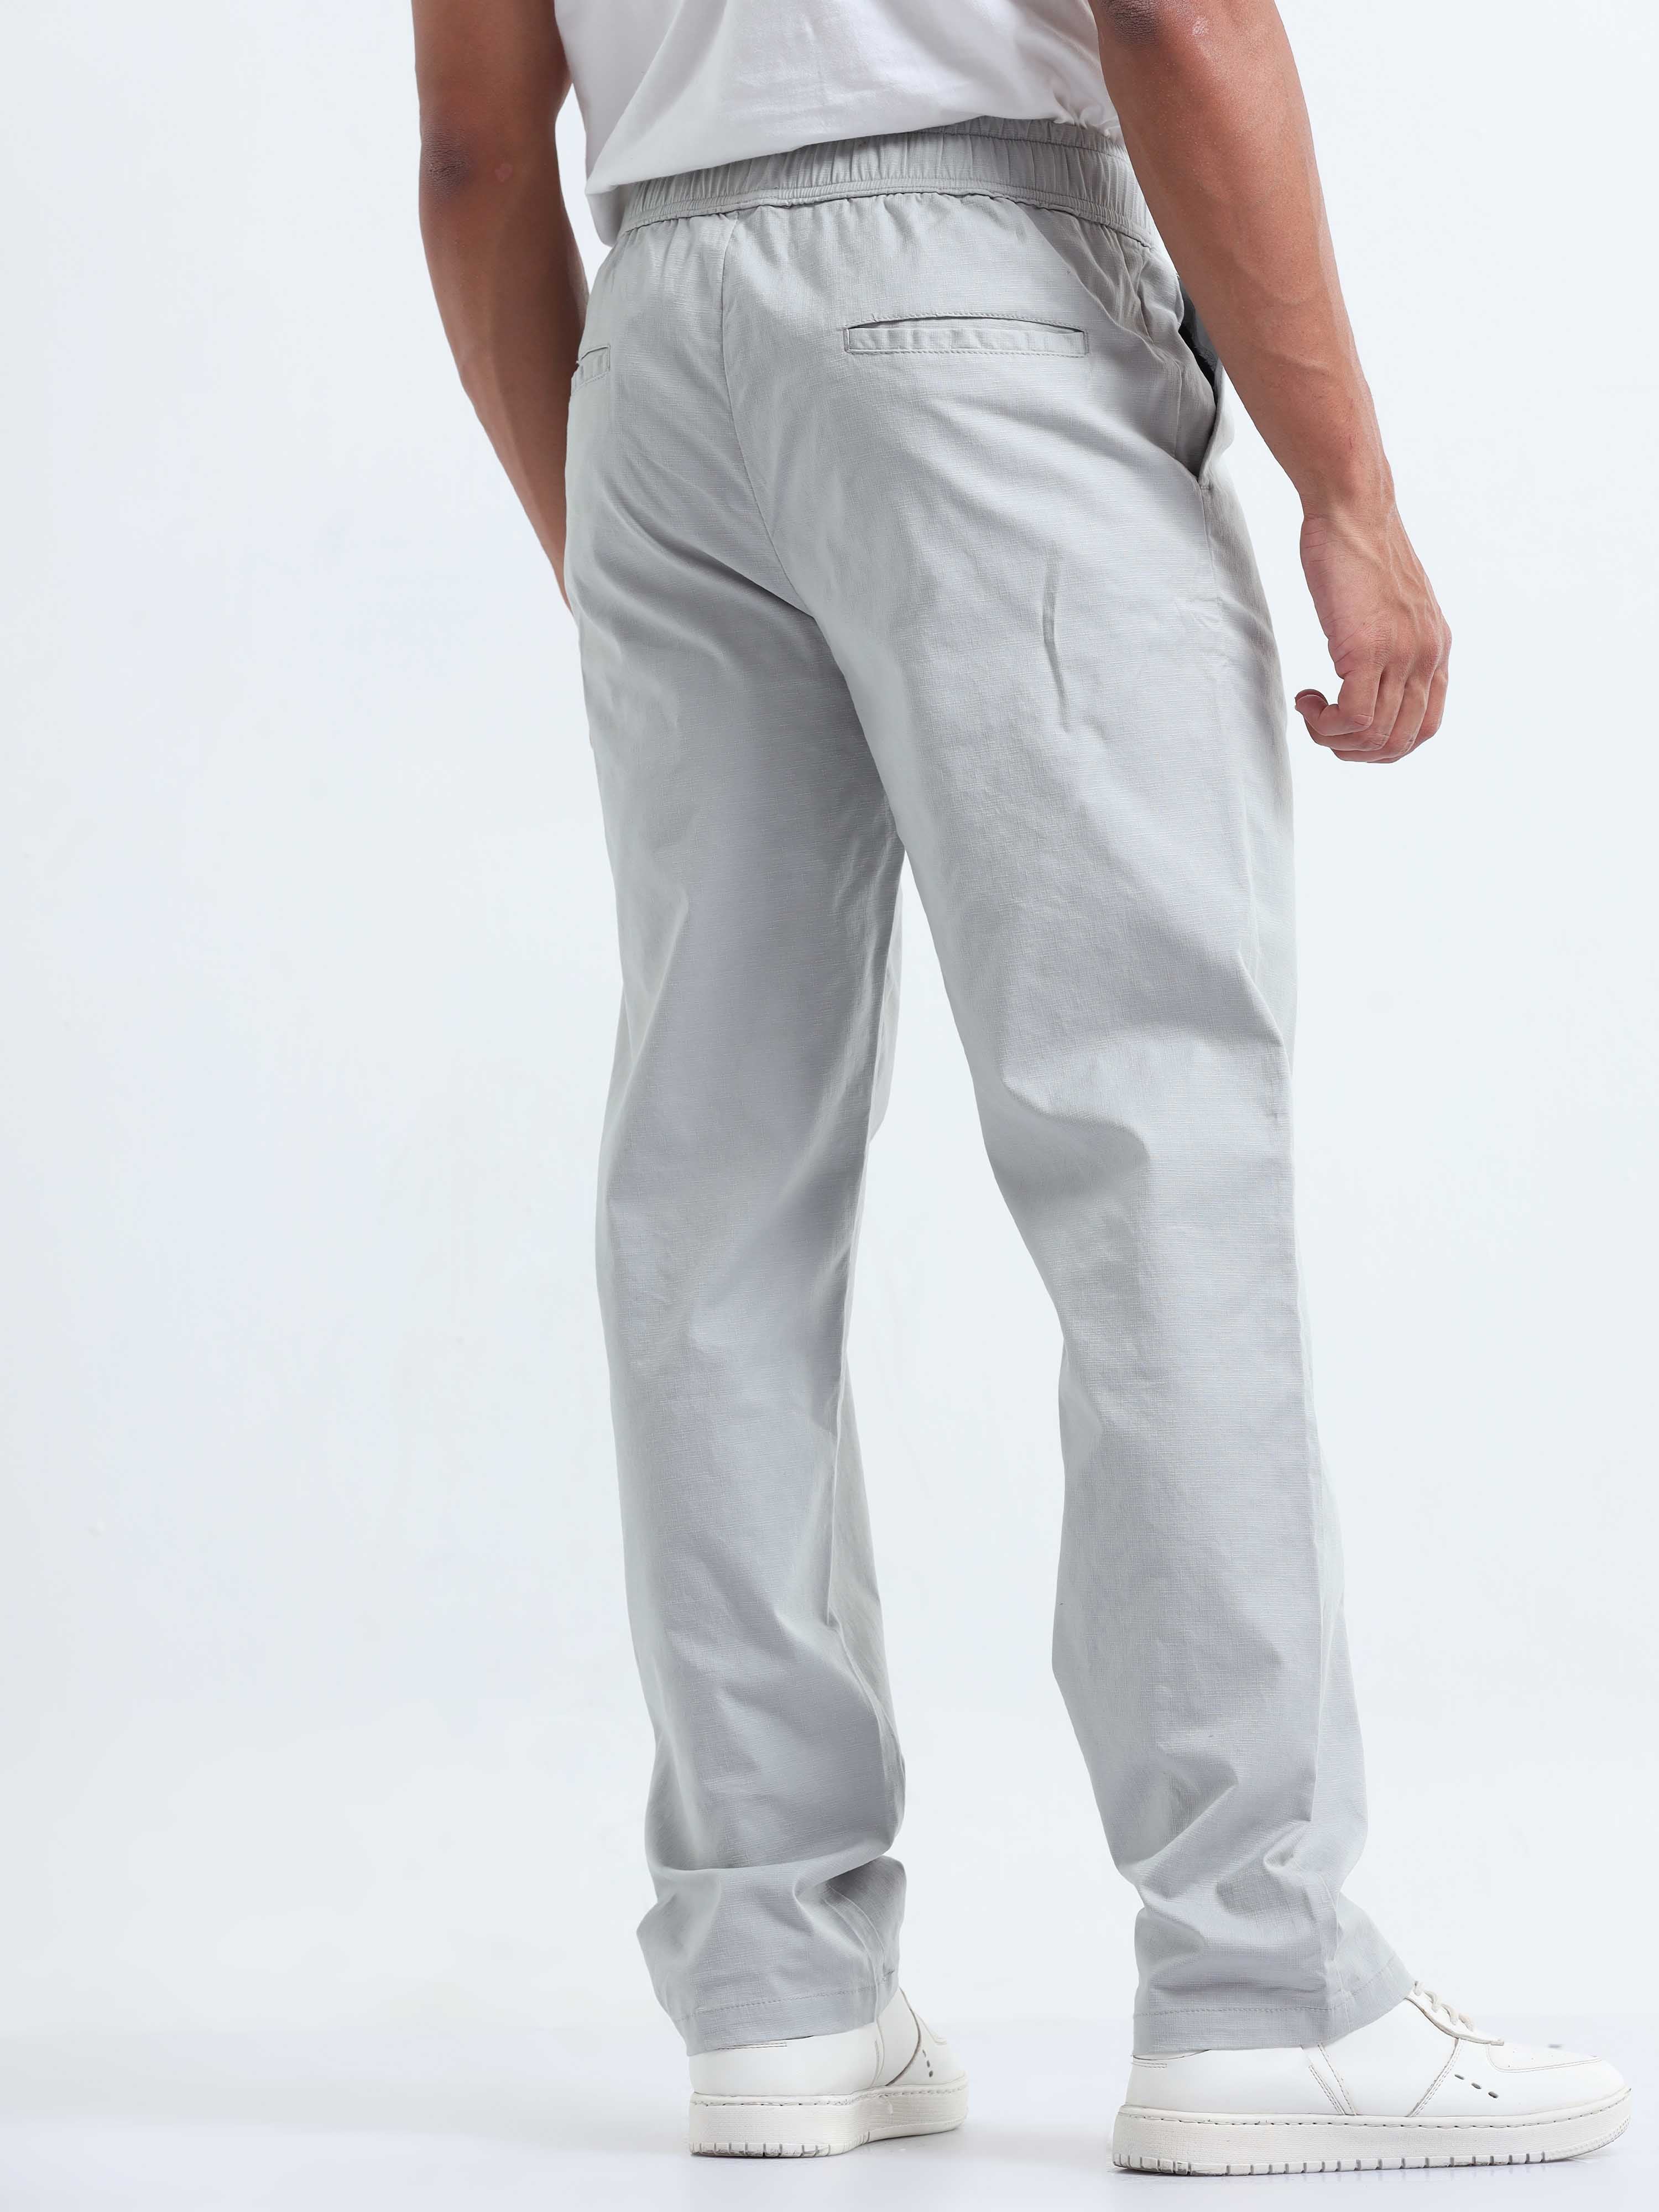 Verve Structural Grey Relaxed Pants for Men